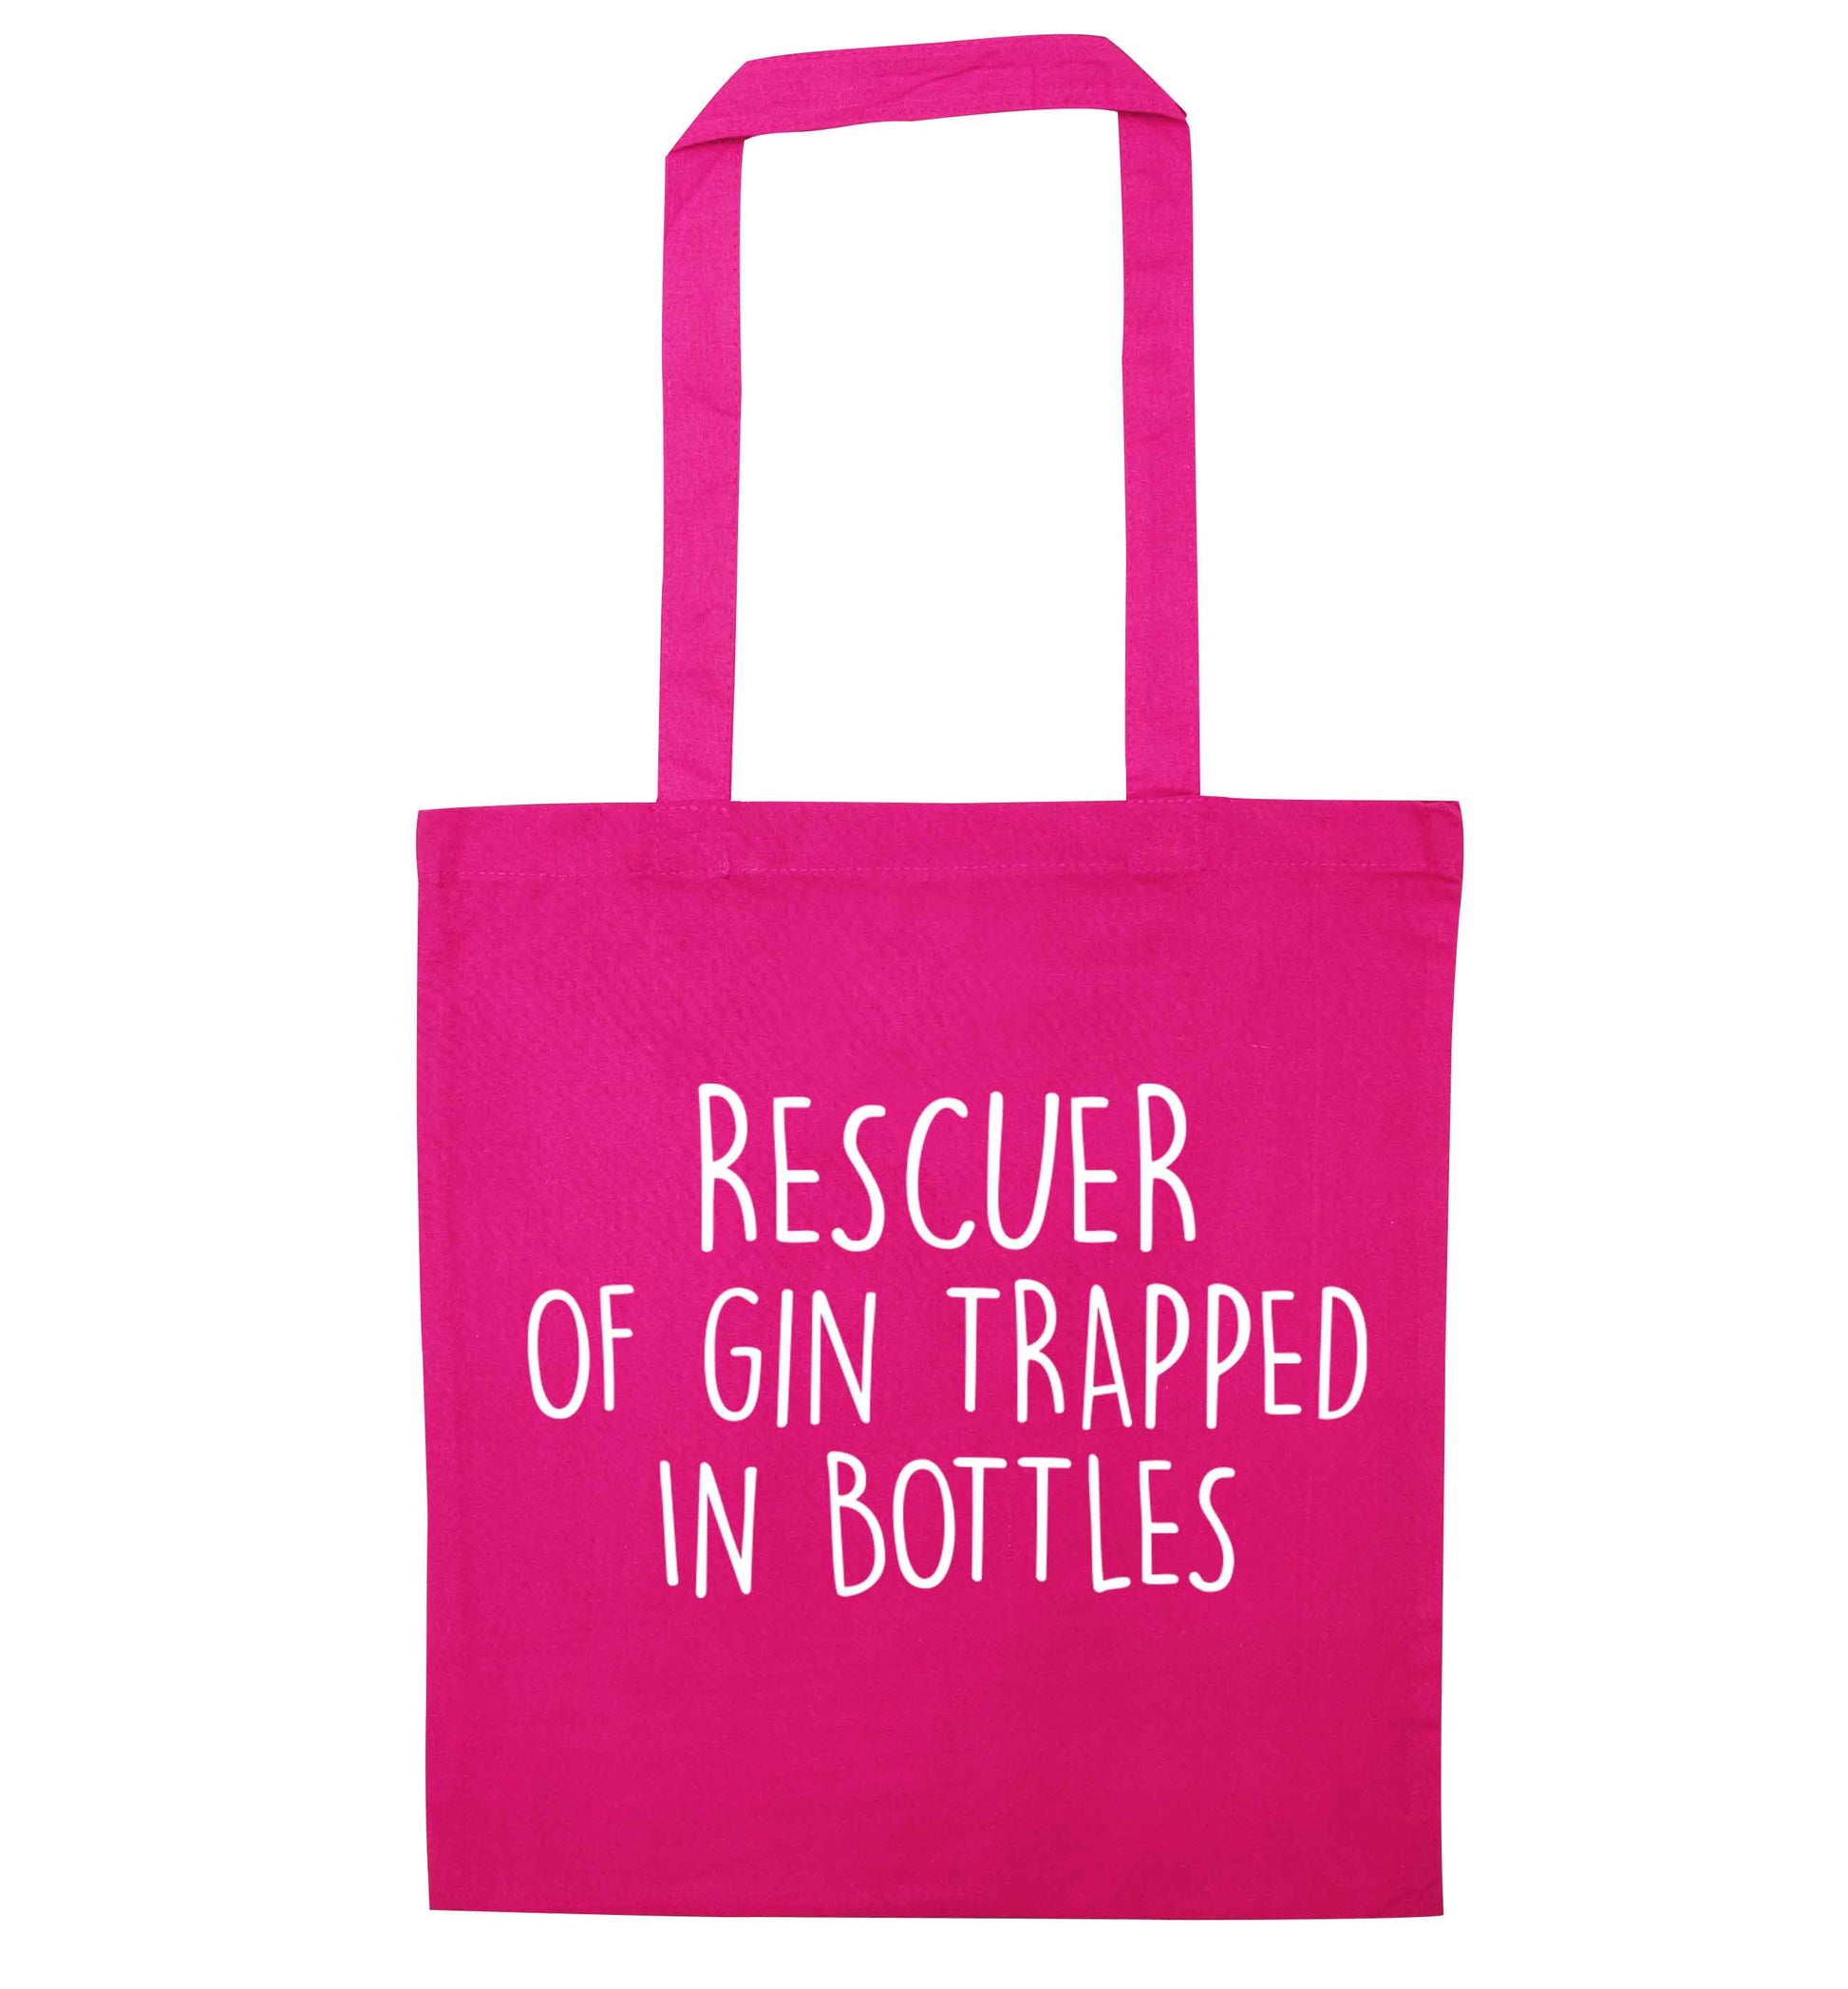 Rescuer of gin trapped in bottles pink tote bag